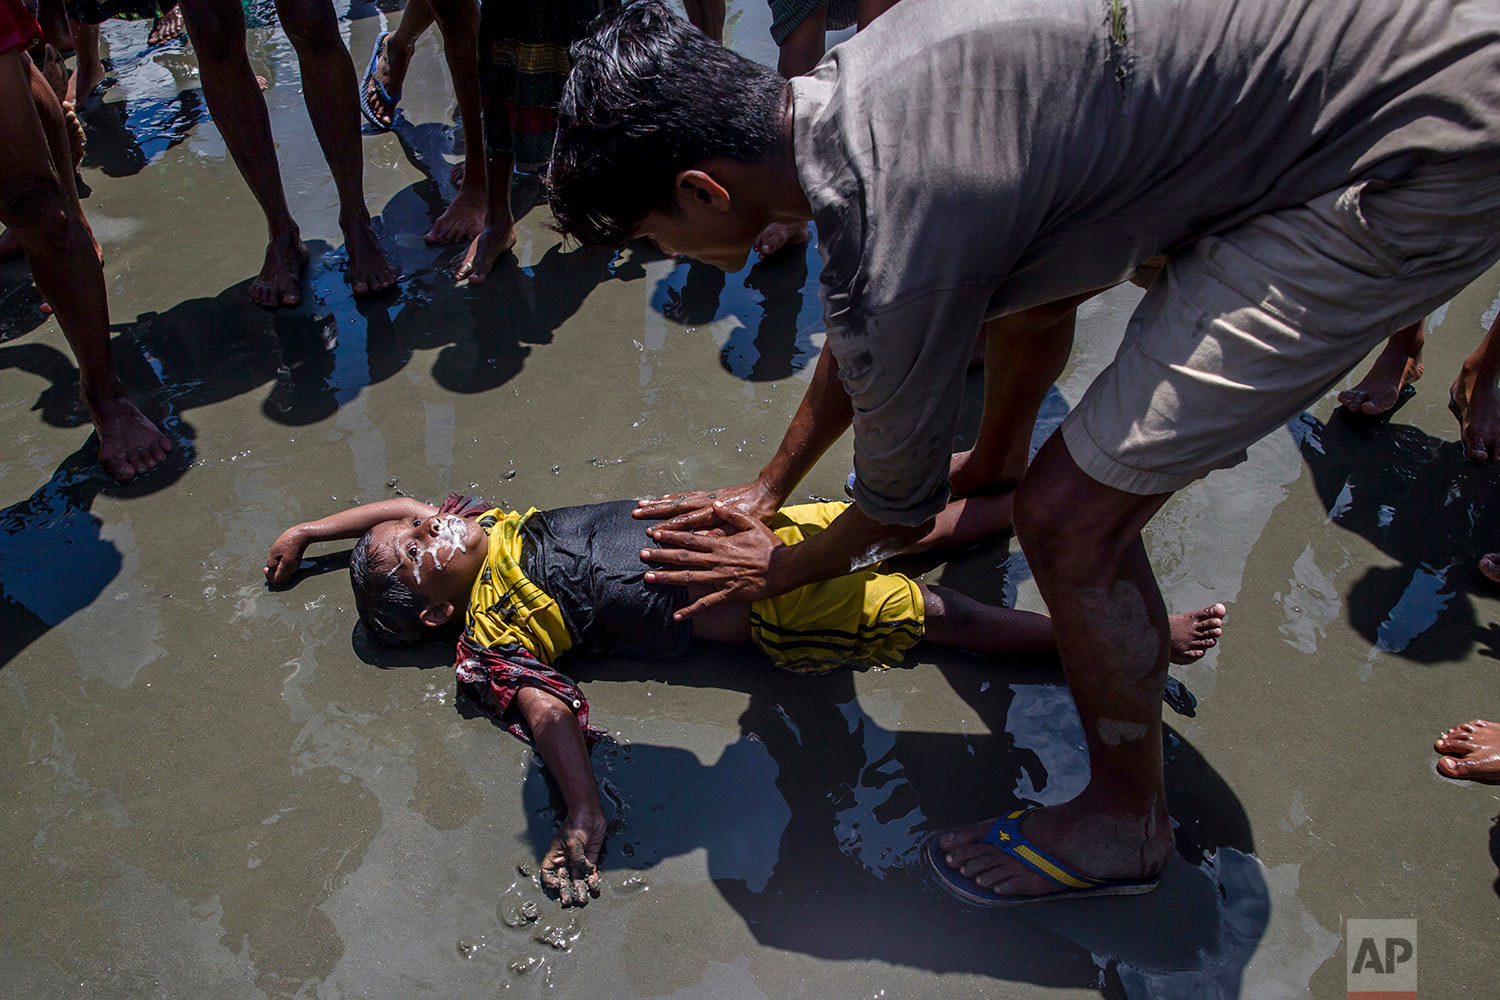  A Rohingya Muslim boy froths from the mouth as a man successfully tries to revive him after the boat he was traveling in capsized just before reaching shore at Shah Porir Dwip, Bangladesh, Thursday, Sept. 14, 2017.  (AP Photo/Dar Yasin) 